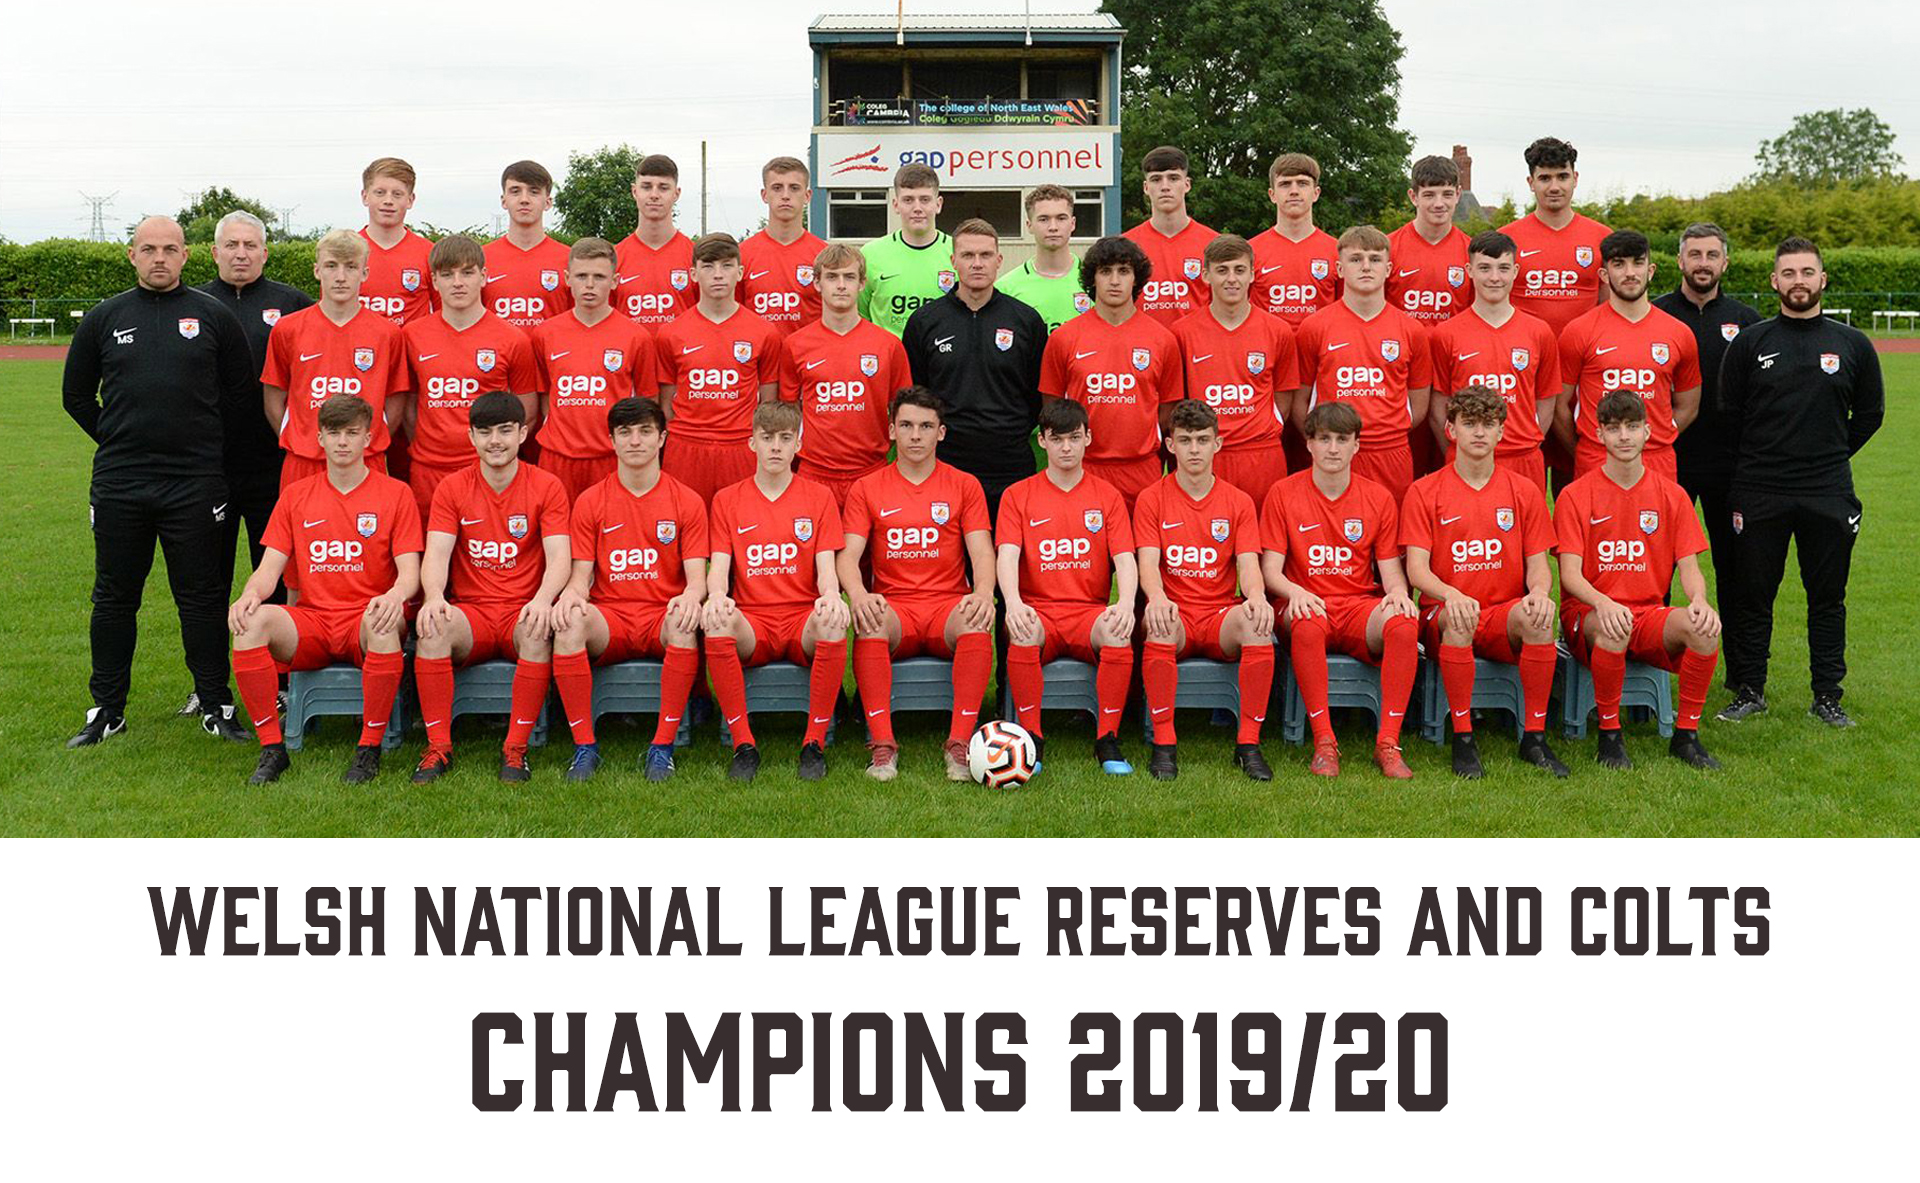 Connah's Quay Nomads U18 team named champions